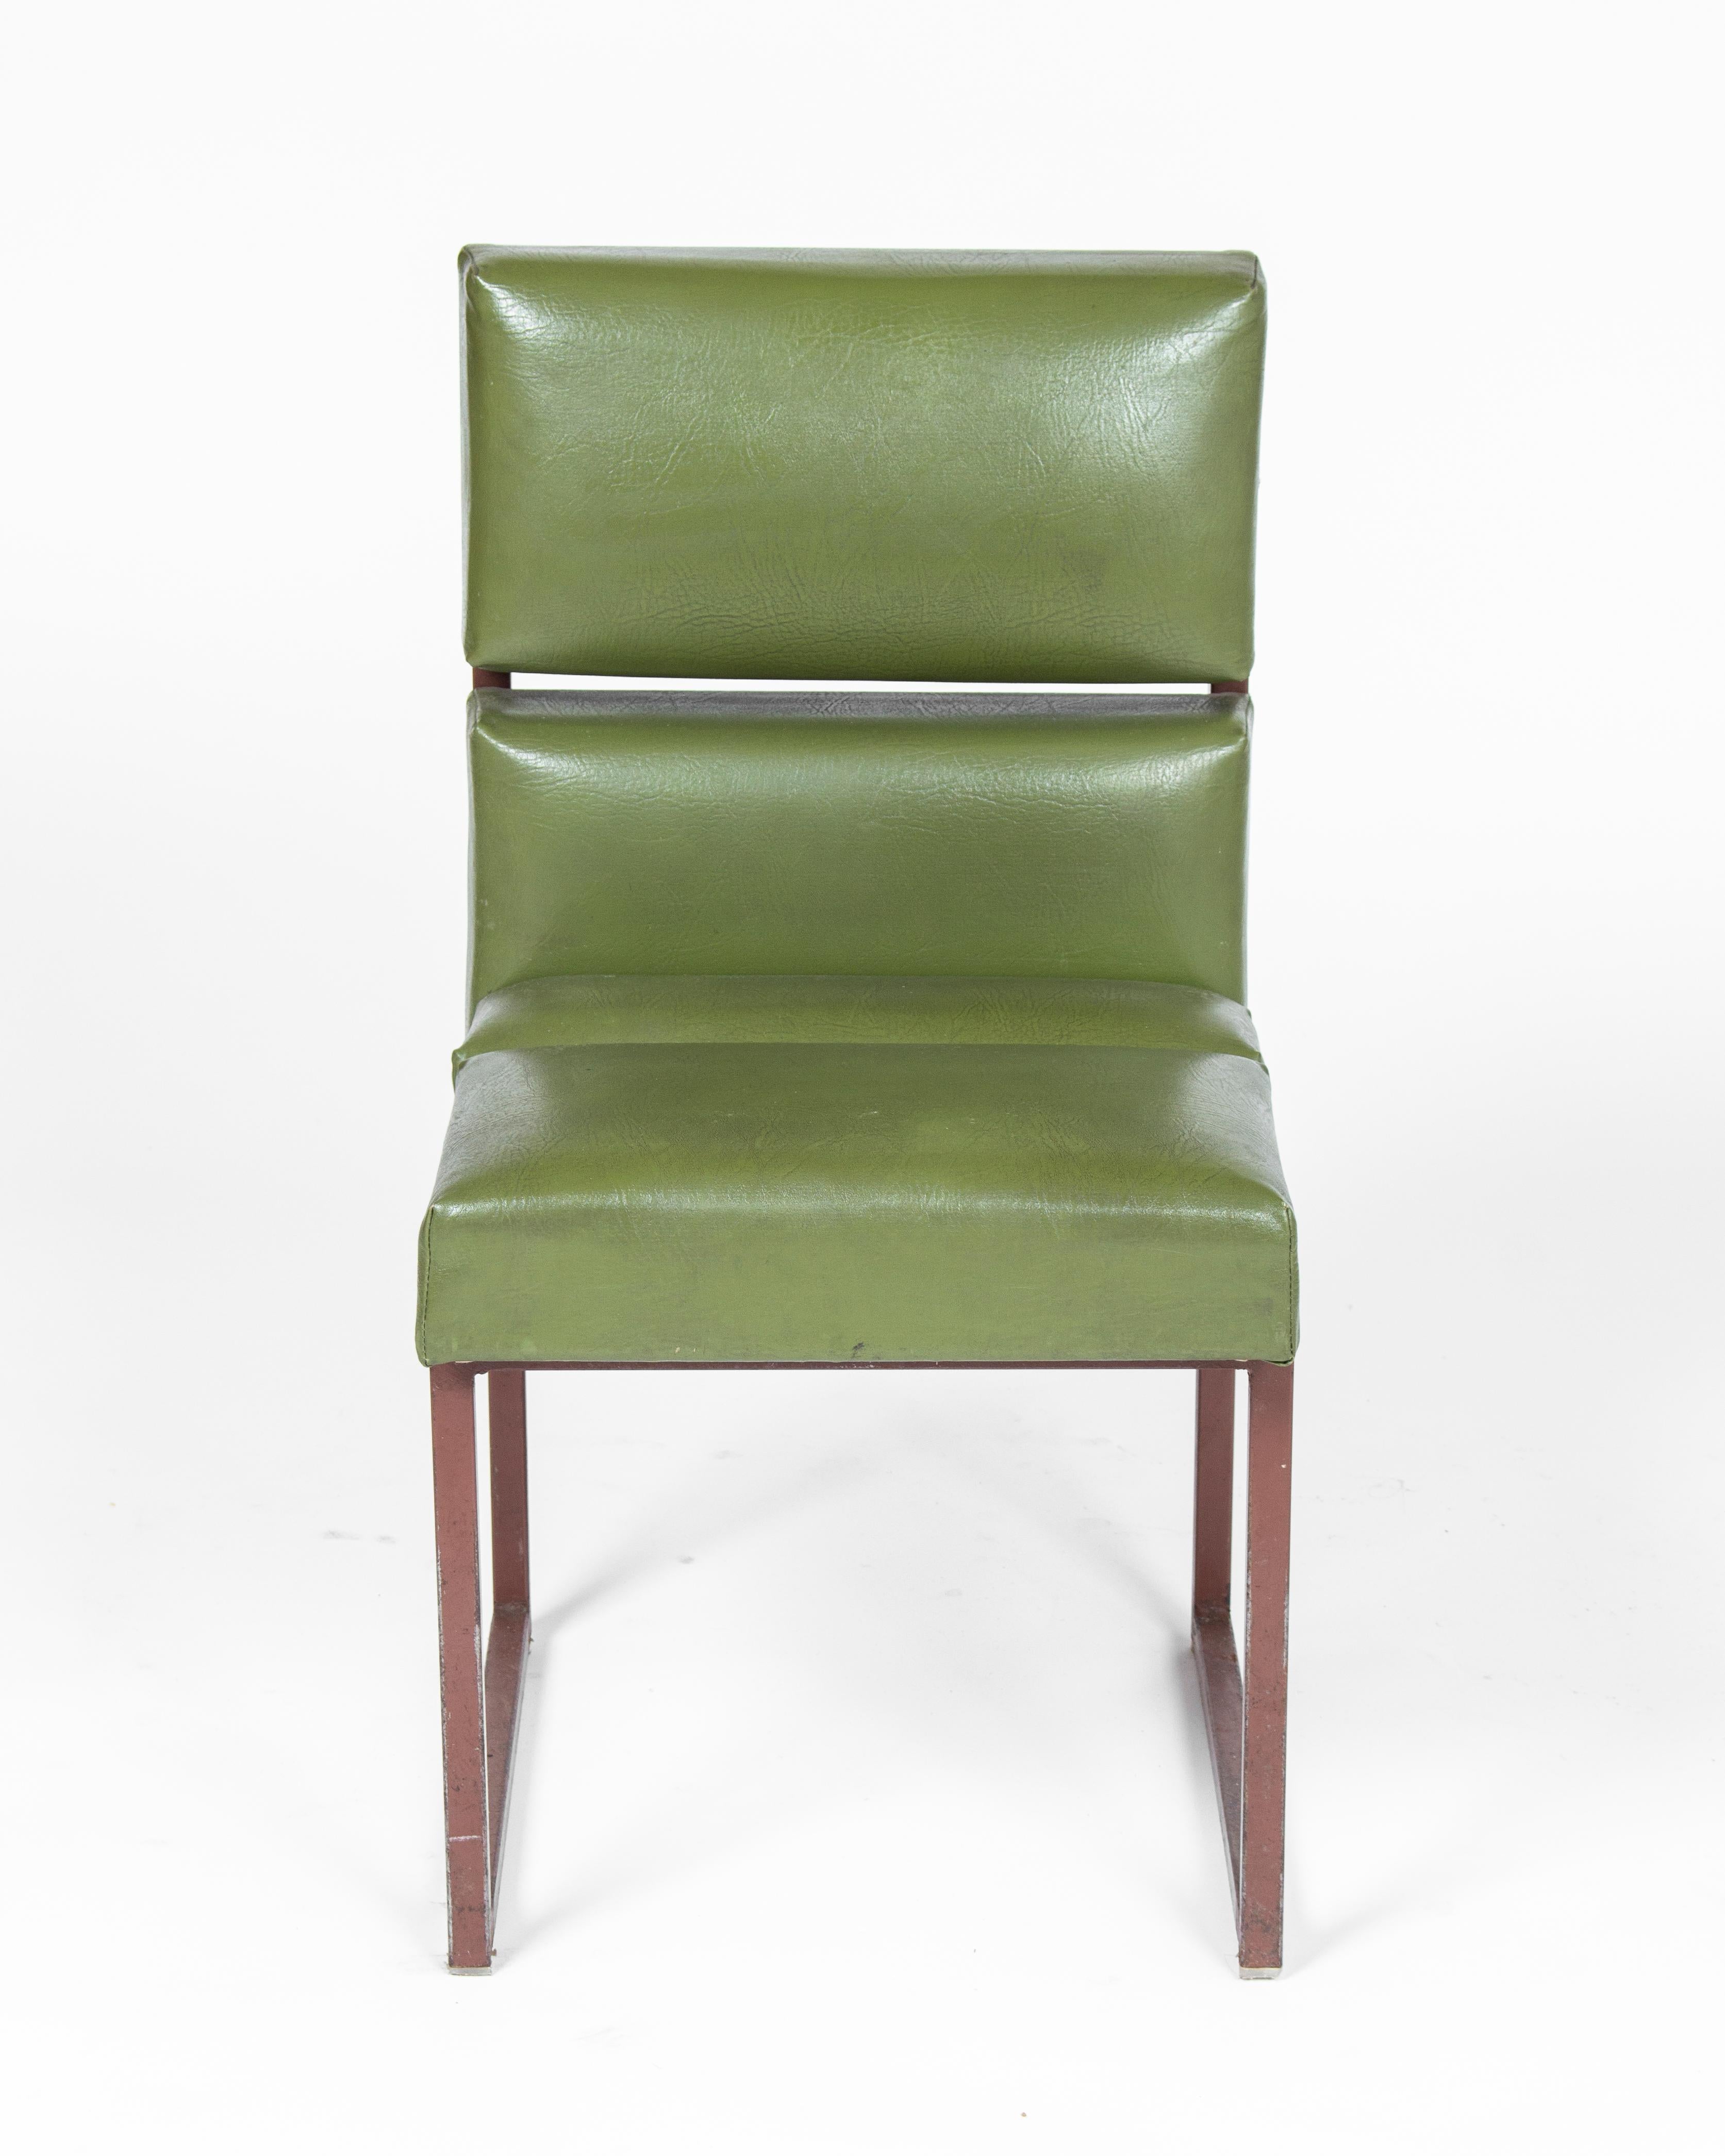 Green design chairs with faux leather.
Manufactures in the 1970s.
In good original condition.